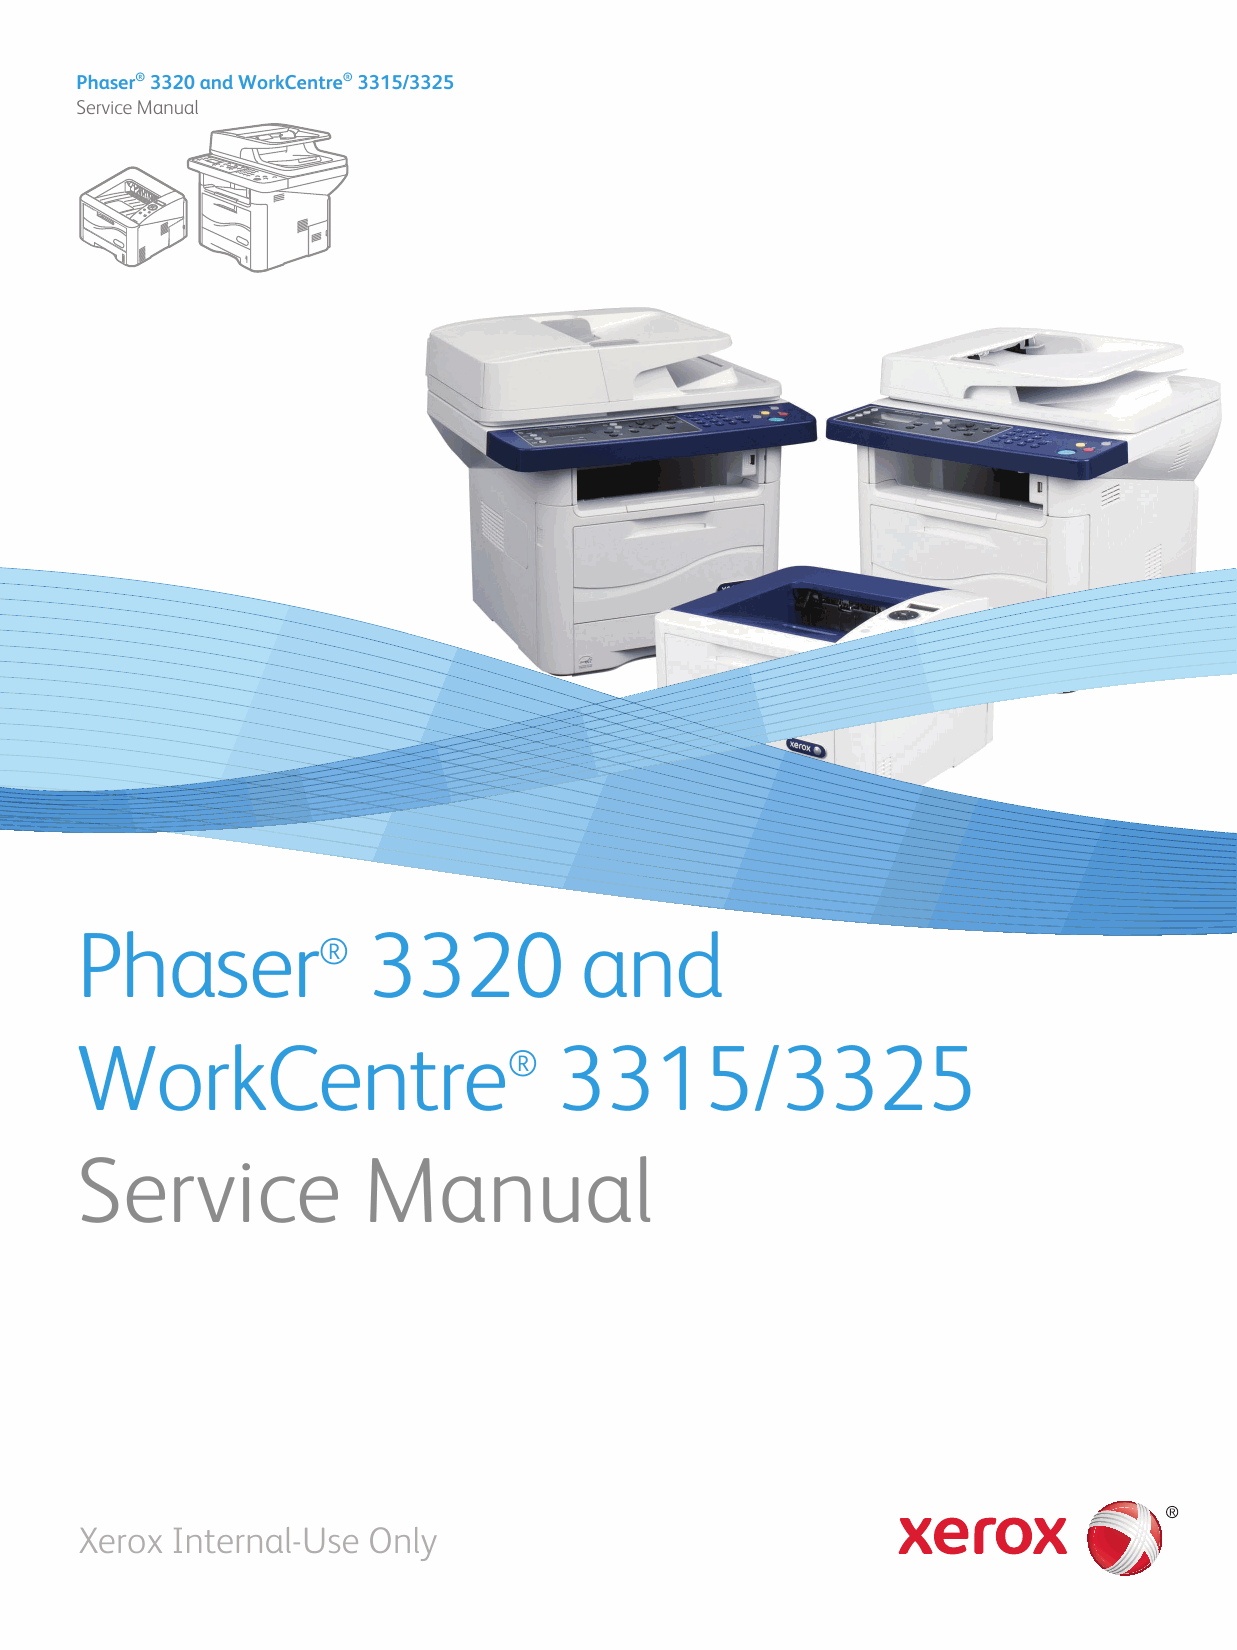 Xerox Phaser 3320 WorkCentre-3315 3325 Parts List and Service Manual-1